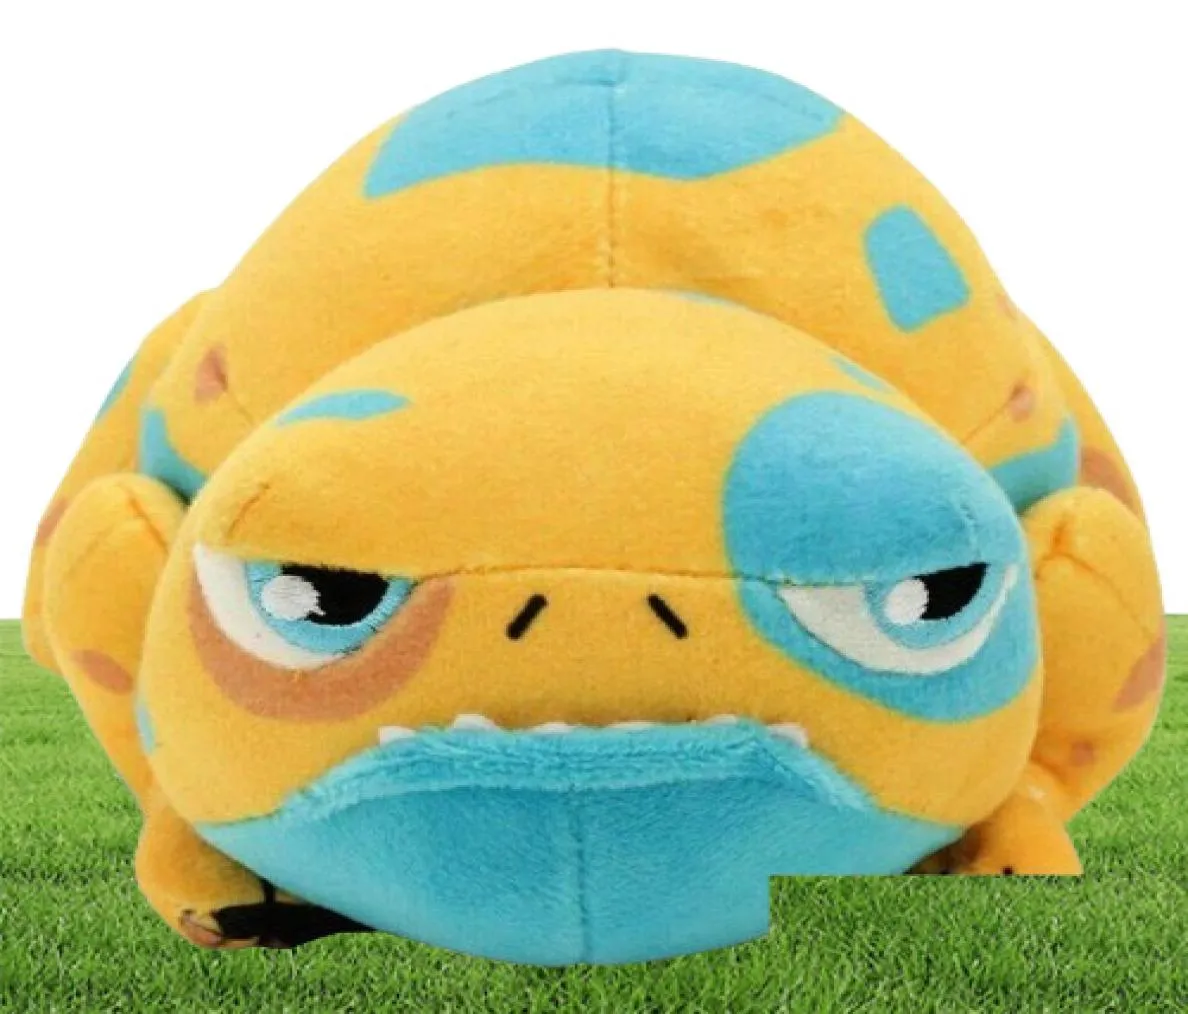 Plush Dolls The Dragon Prince Bait Figure Toy Soft Stuffed Doll 9 Inch Yellow 2204094338181 Drop Delivery Toys Gifts Animals Dh1H66367297